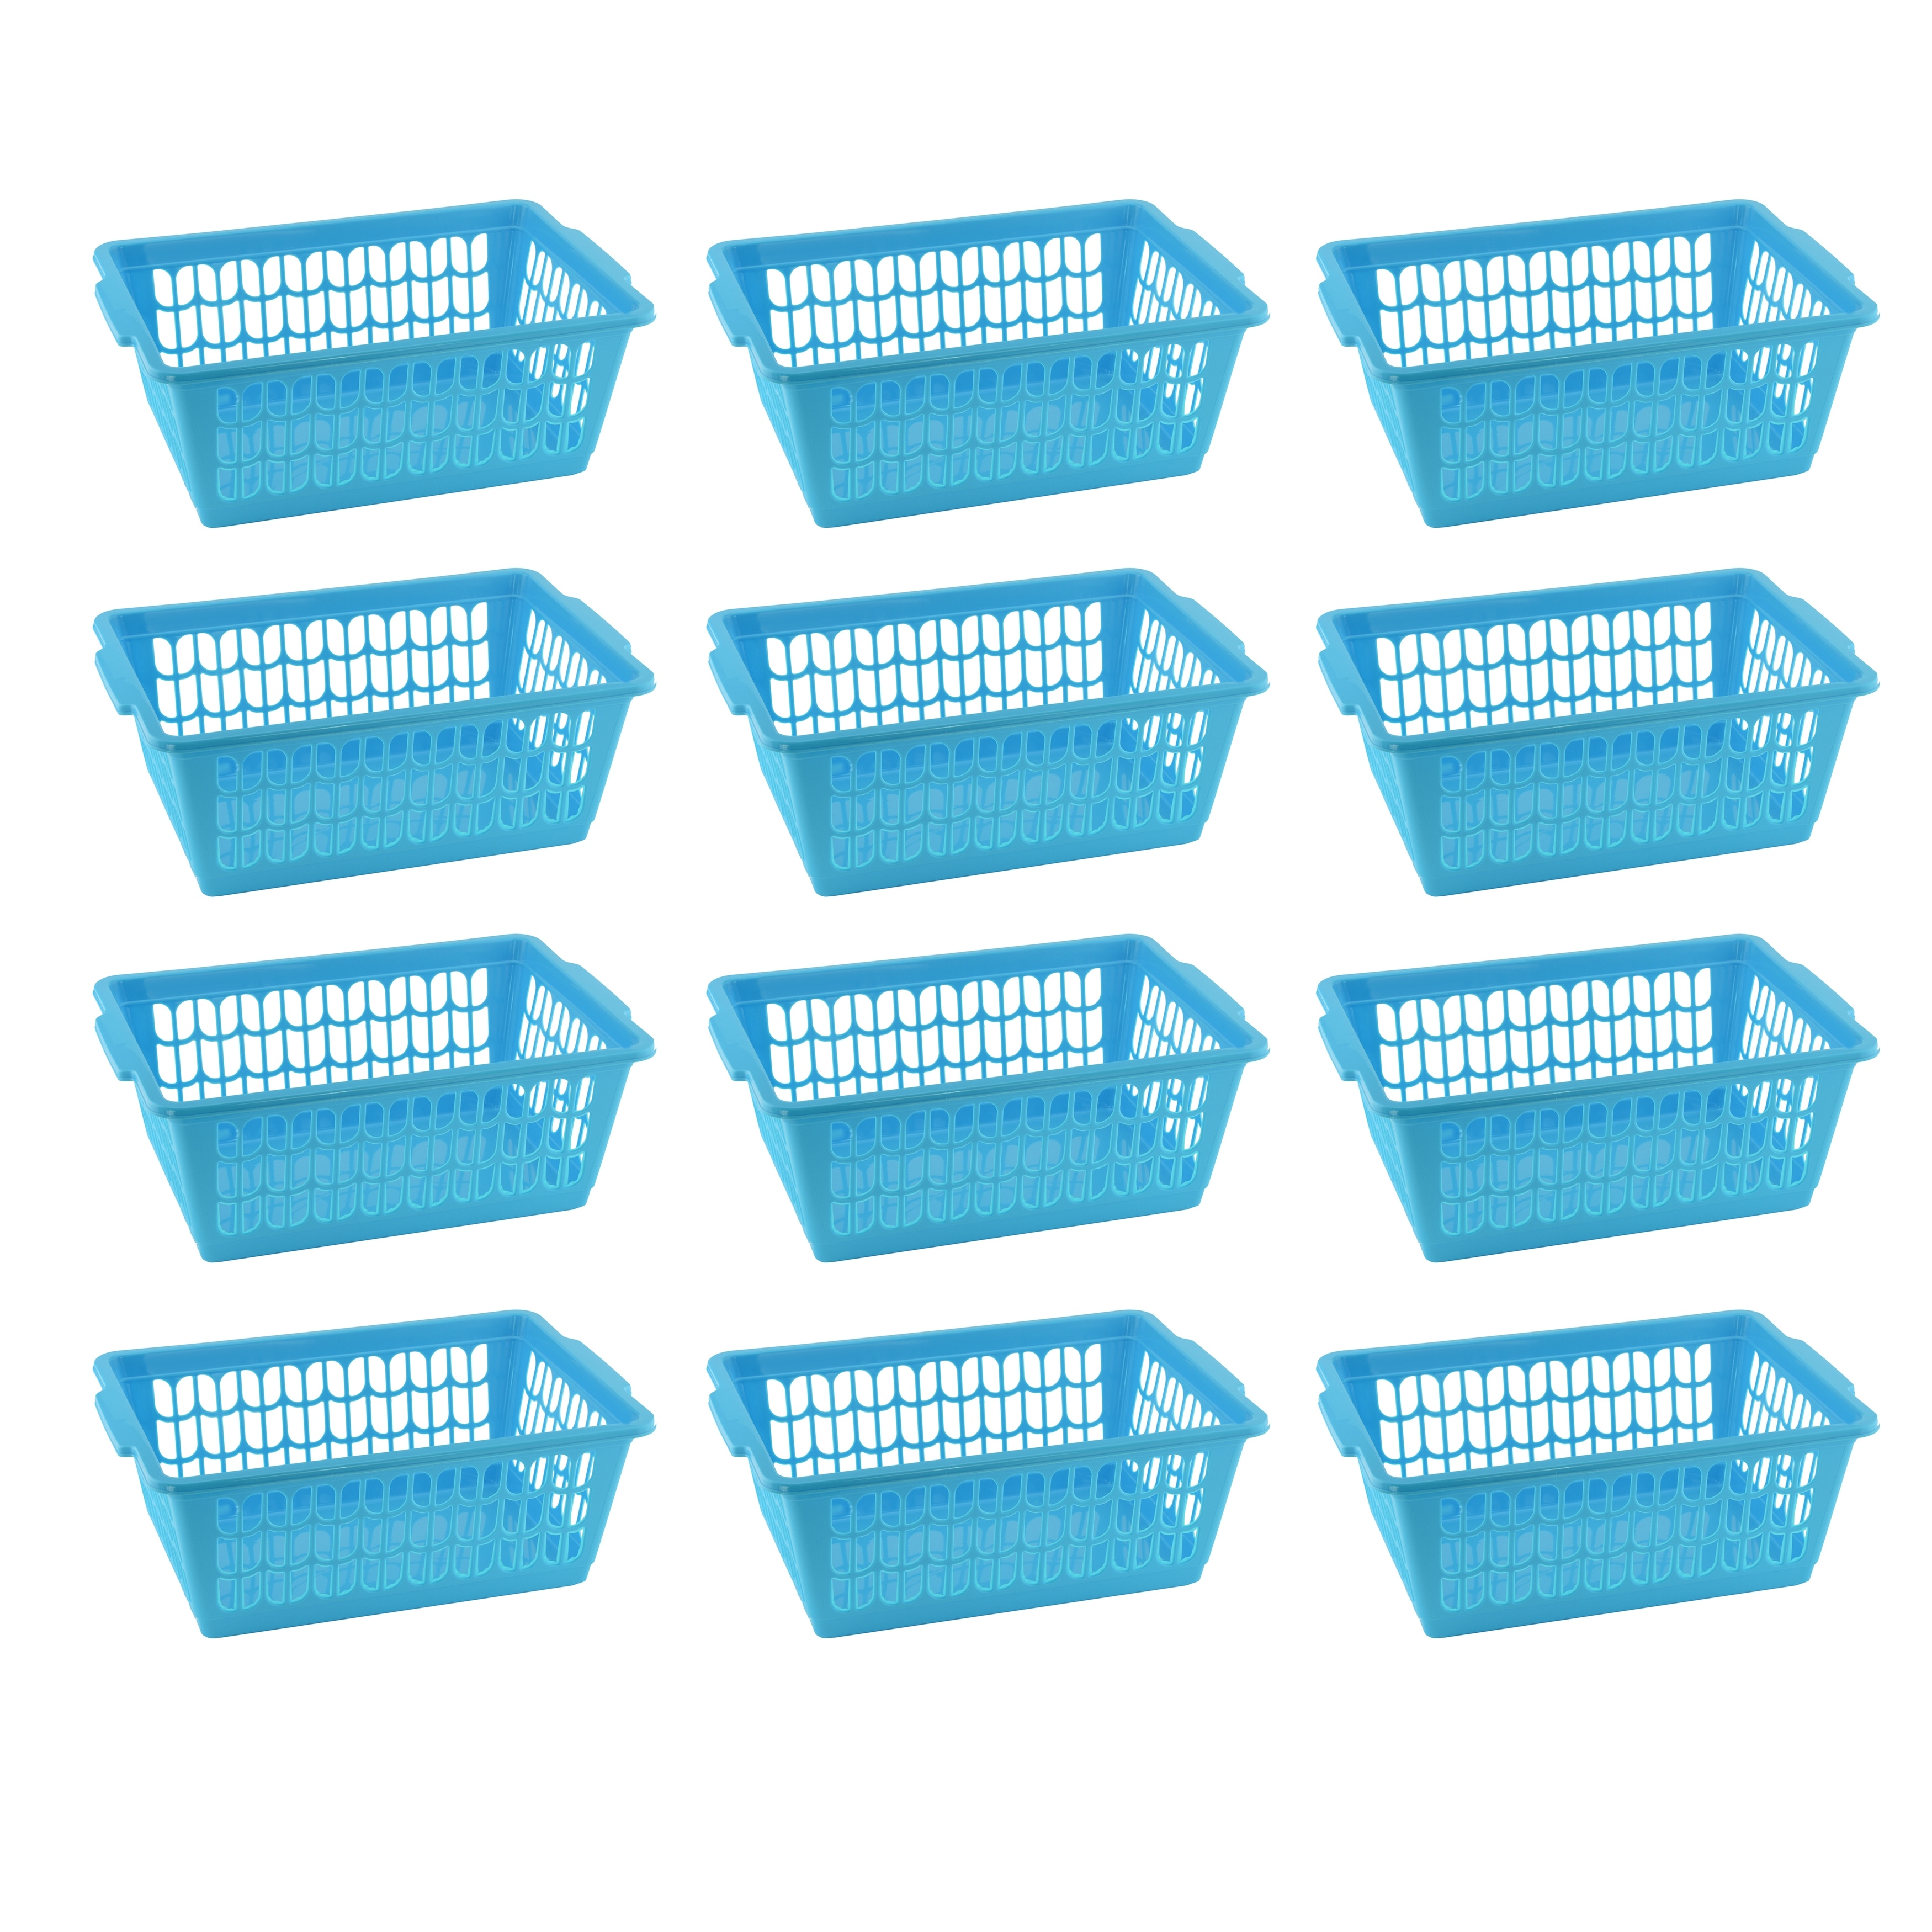 https://ak1.ostkcdn.com/images/products/is/images/direct/b0379c65aed4c0145f74f8328dbc0f636702c220/Small-Plastic-Storage-Basket-for-Organizing-Kitchen-Pantry%2C-Countertop.jpg